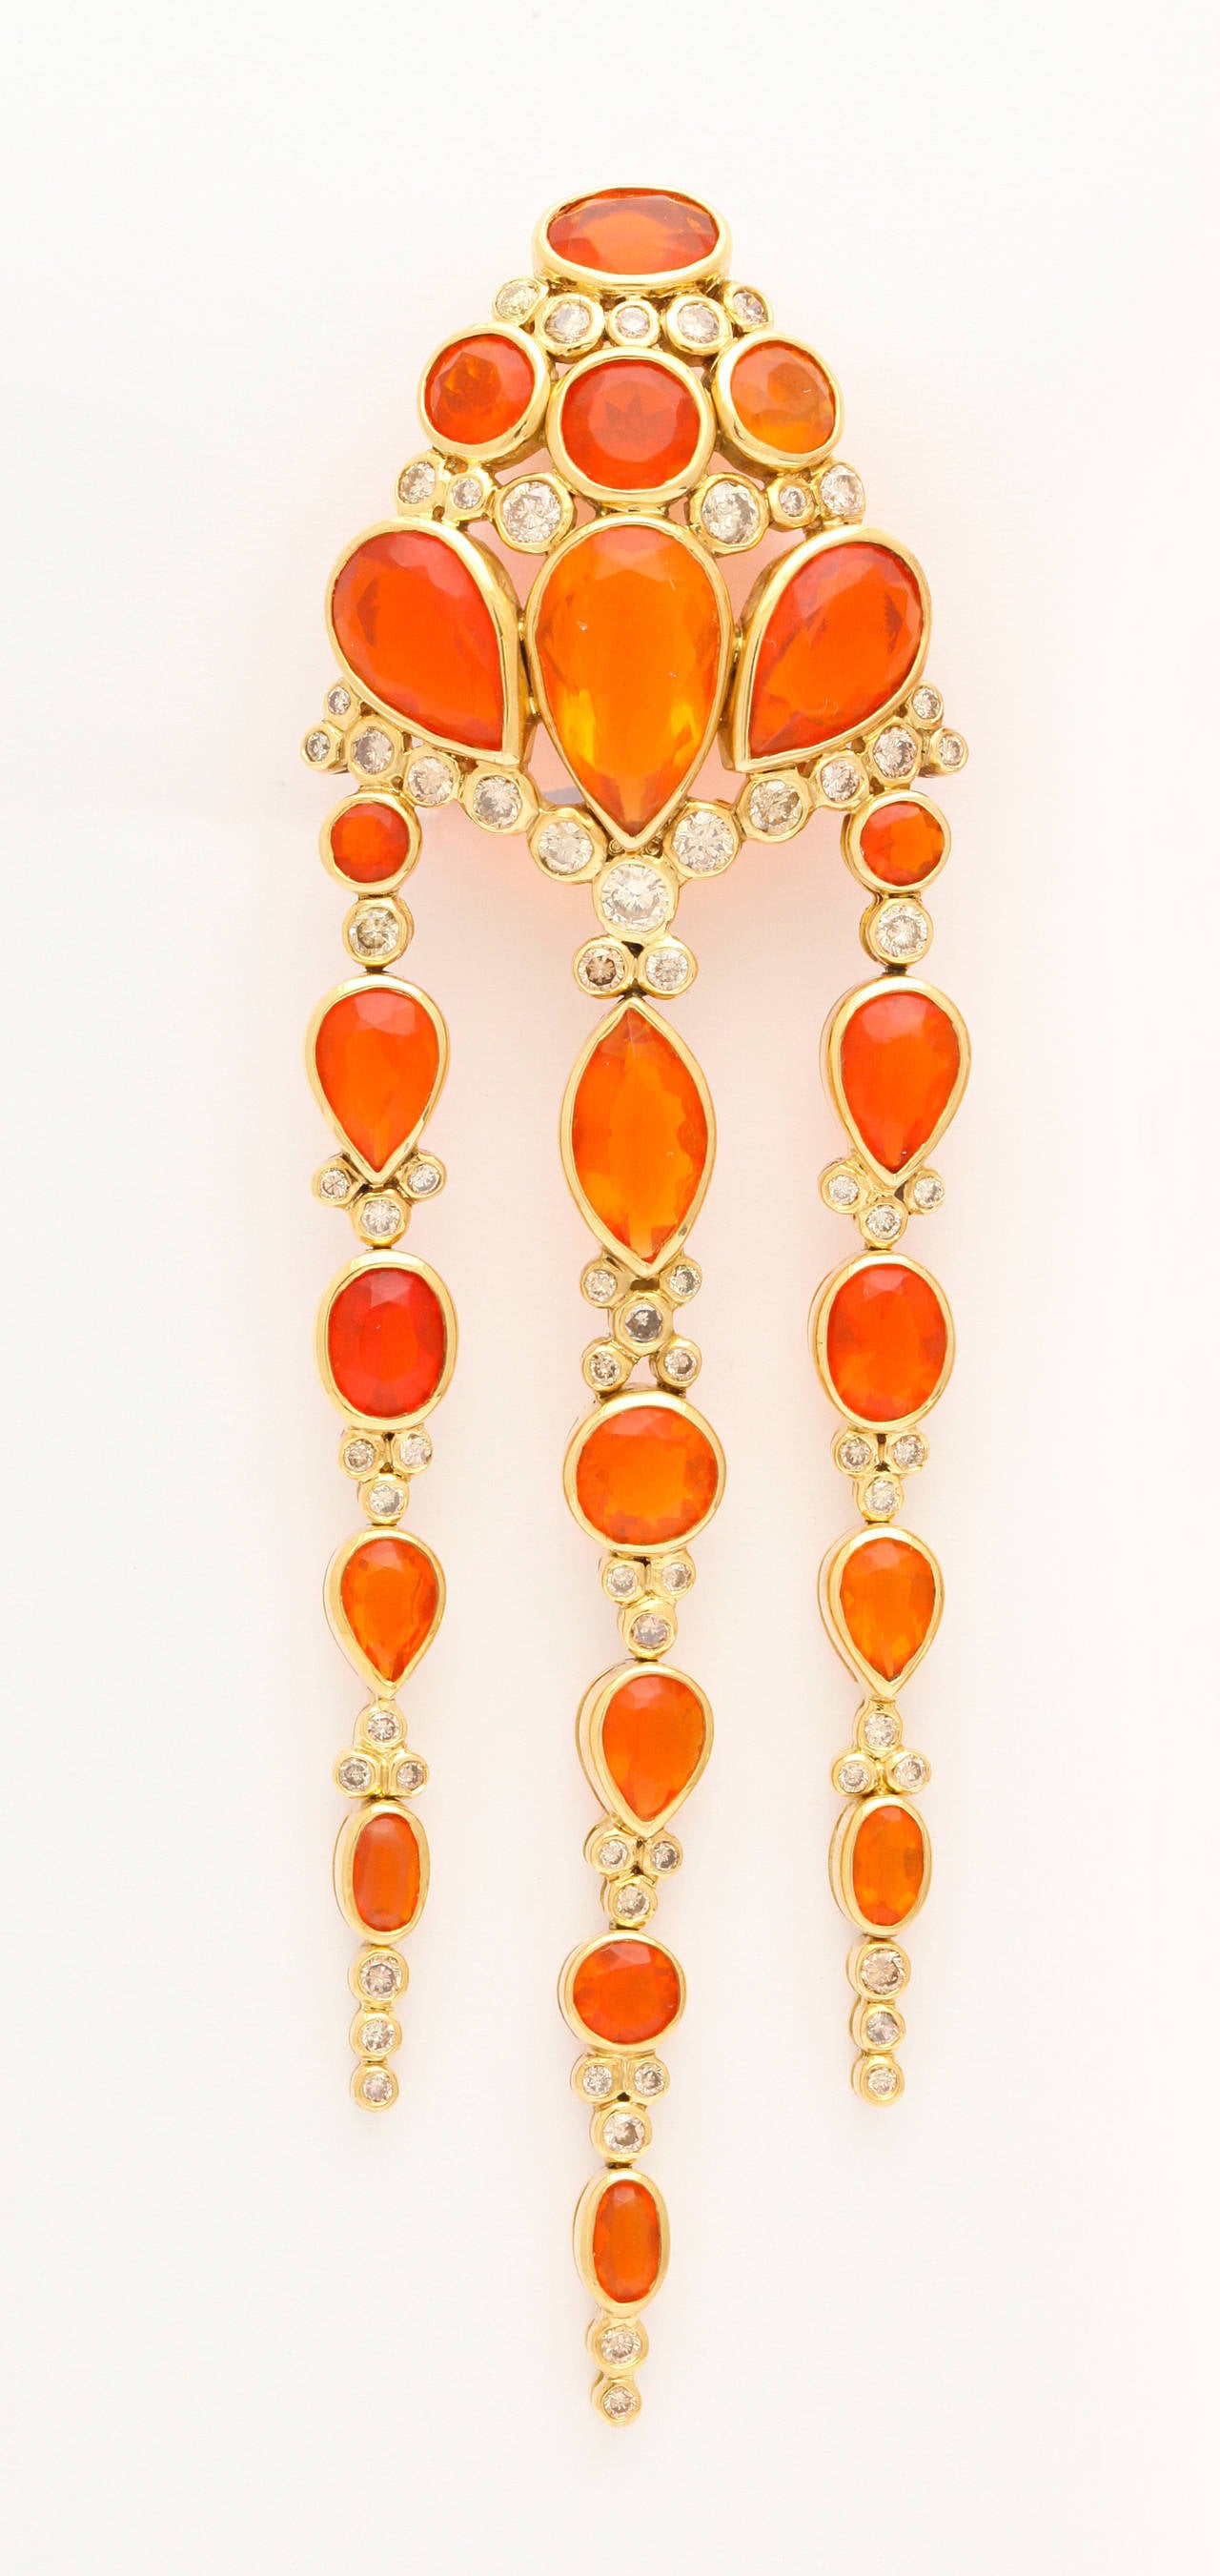 These stunning Marilyn Cooperman earrings glitter and glow with a cascade of Mexican fire opals and diamonds set in 18K gold. 1 inch wide and a generous 3 3/4 inches long. Signed, numbered, dated, and gold marked.
Marilyn is an exclusive New York